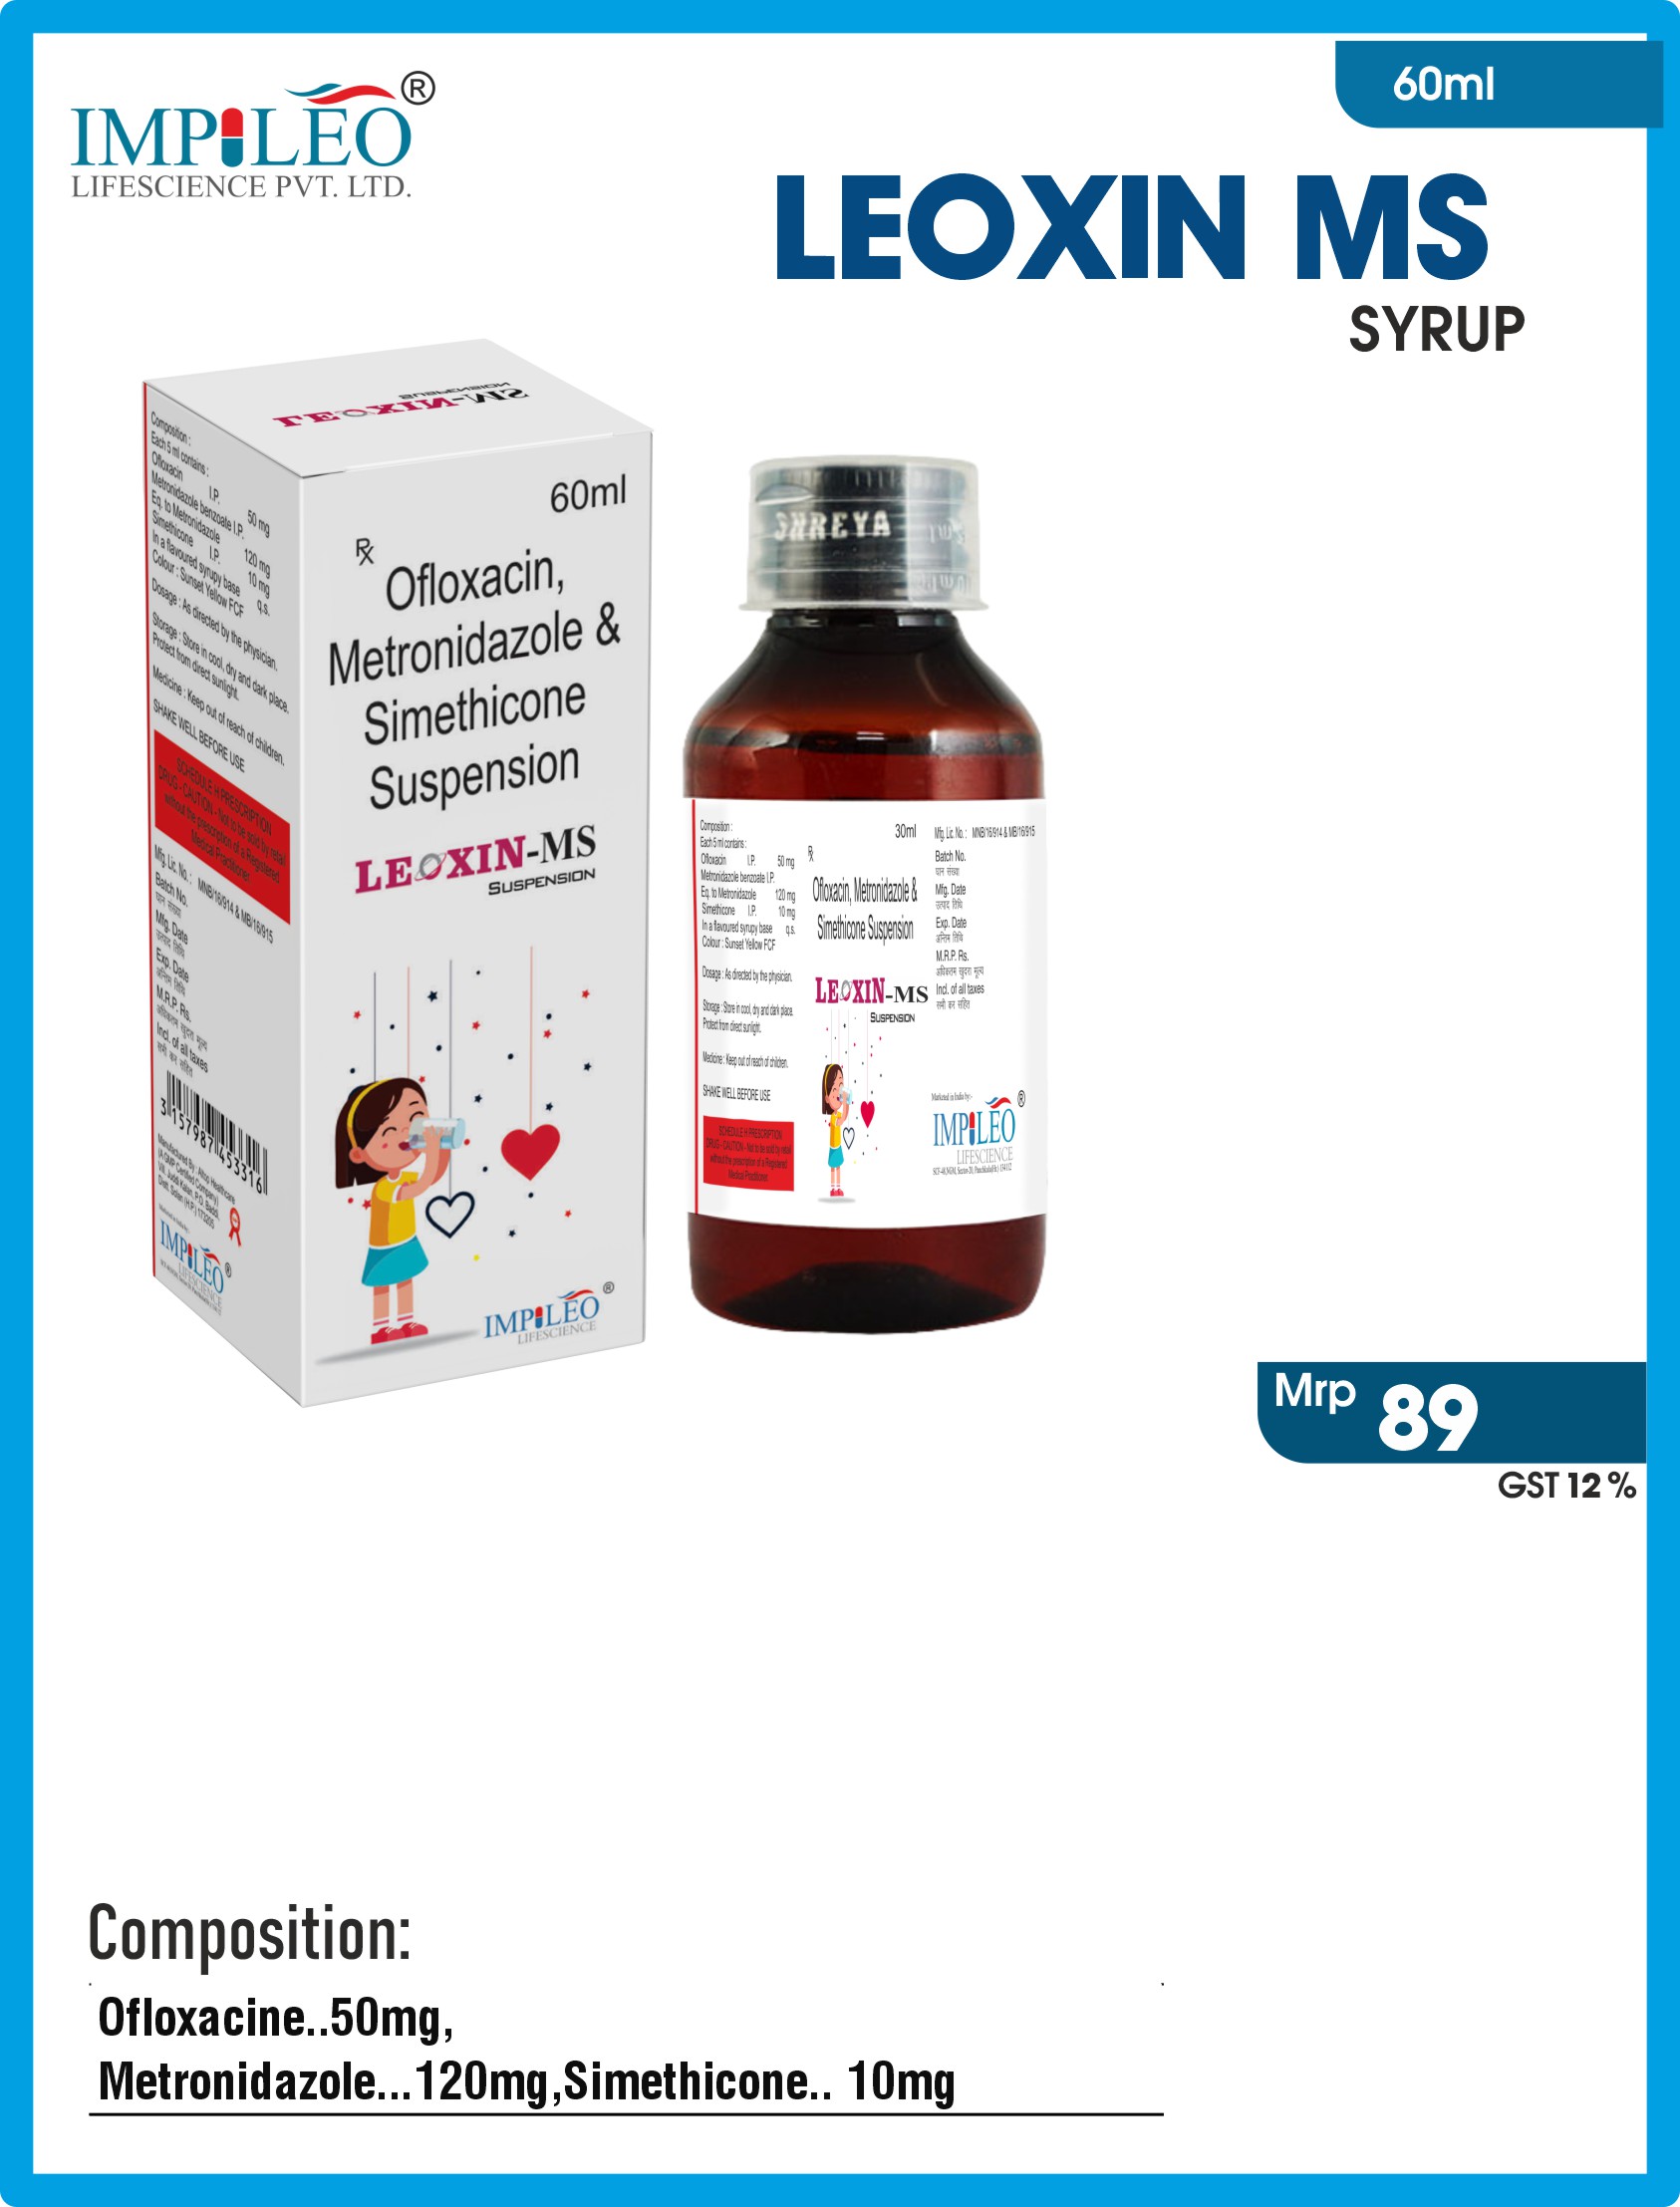 Partner for Success: LEOXIN MS SYRUP by Premier PCD Pharma Franchise in India